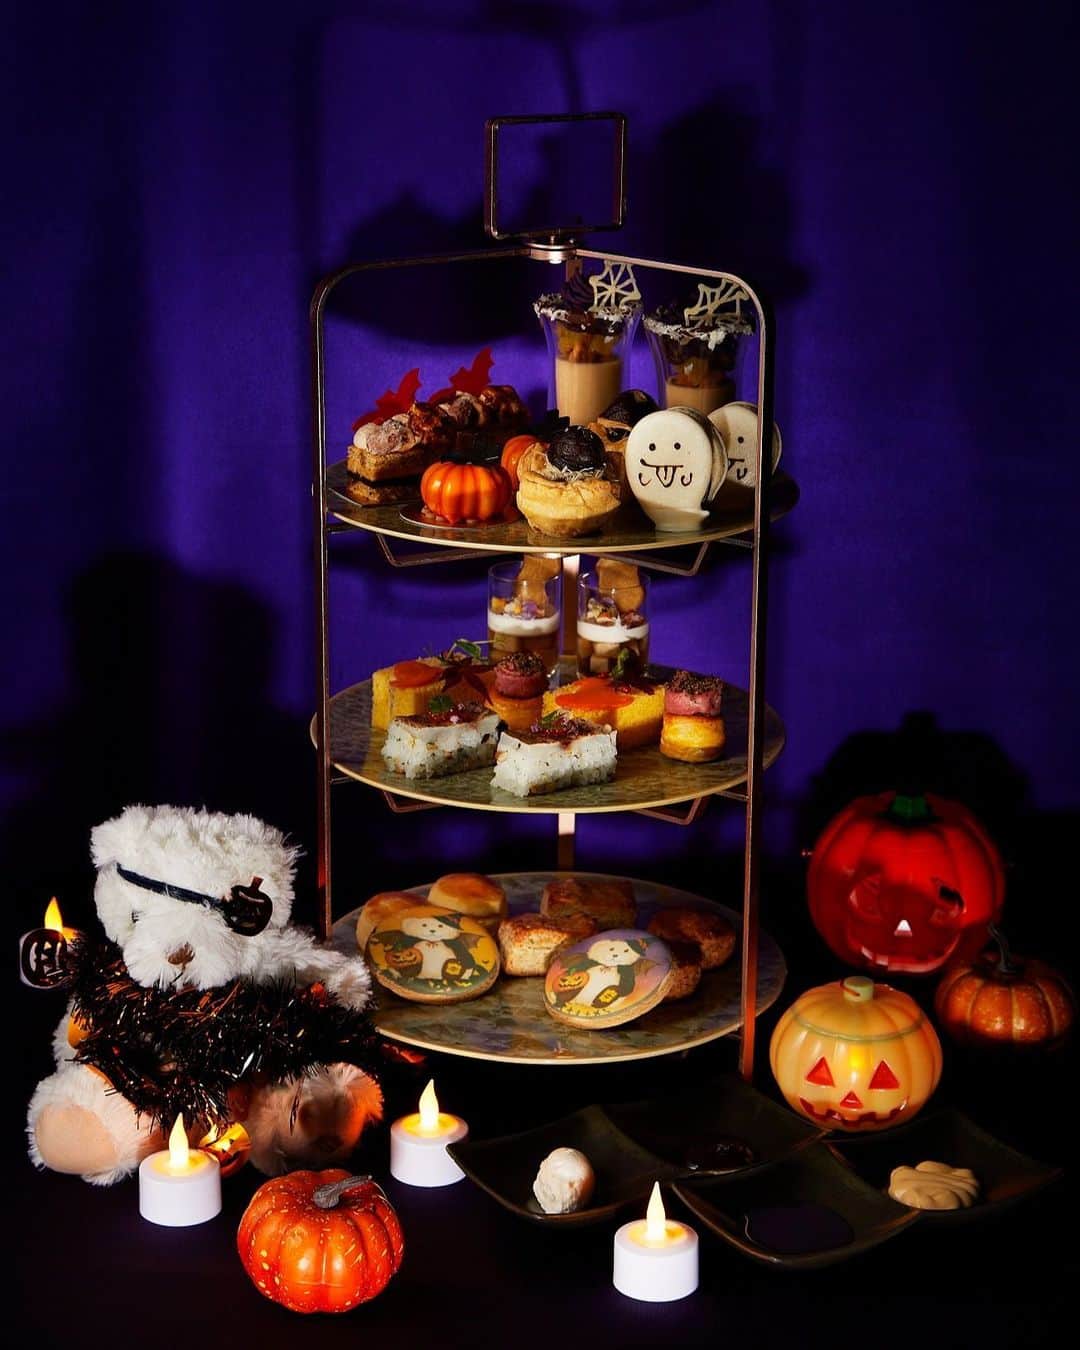 Shangri-La Hotel, Tokyoのインスタグラム：「いよいよ10月から「ハロウィンアフタヌーンティー」の登場です。⁣ ⁣ 今シーズンは、北海道産のかぼちゃをはじめ、栗やさつまいもからサンマまで、秋を代表する旬の食材もふんだんに使用。この季節ならではの味覚を詰め込んだ秋のラインナップでお届けいたします。⁣ ⁣ 愛らしいおばけマカロンなど10月限定のアフタヌーンティーで、ハロウィン気分をお楽しみください。⁣ ⁣ Our popular "Halloween Afternoon Tea" is now standing by to start from October 1.⁣ ⁣ This season, plenty of seasonal representatives of autumn, including pumpkins from Hokkaido, chestnuts, sweet potatoes, and saury decorate the three-tier tea stand in a chic manner. ⁣ ⁣ Halloween spirit with our October-only Afternoon Tea featuring adorable ghost macaroons and spiders' webs made of chocolate. ⁣ Trick or treat!⁣ ⁣ #shangrilacircle #myshangrila #shangrilahotels #shangrila #shangrilatokyo #tokyotravel #tokyotrip #tokyostation #afternoontea #halloween #シャングリラ #シャングリラ東京 #シャングリラサークル #東京駅 #丸の内 #大手町 #アフタヌーンティー #ハロウィン」